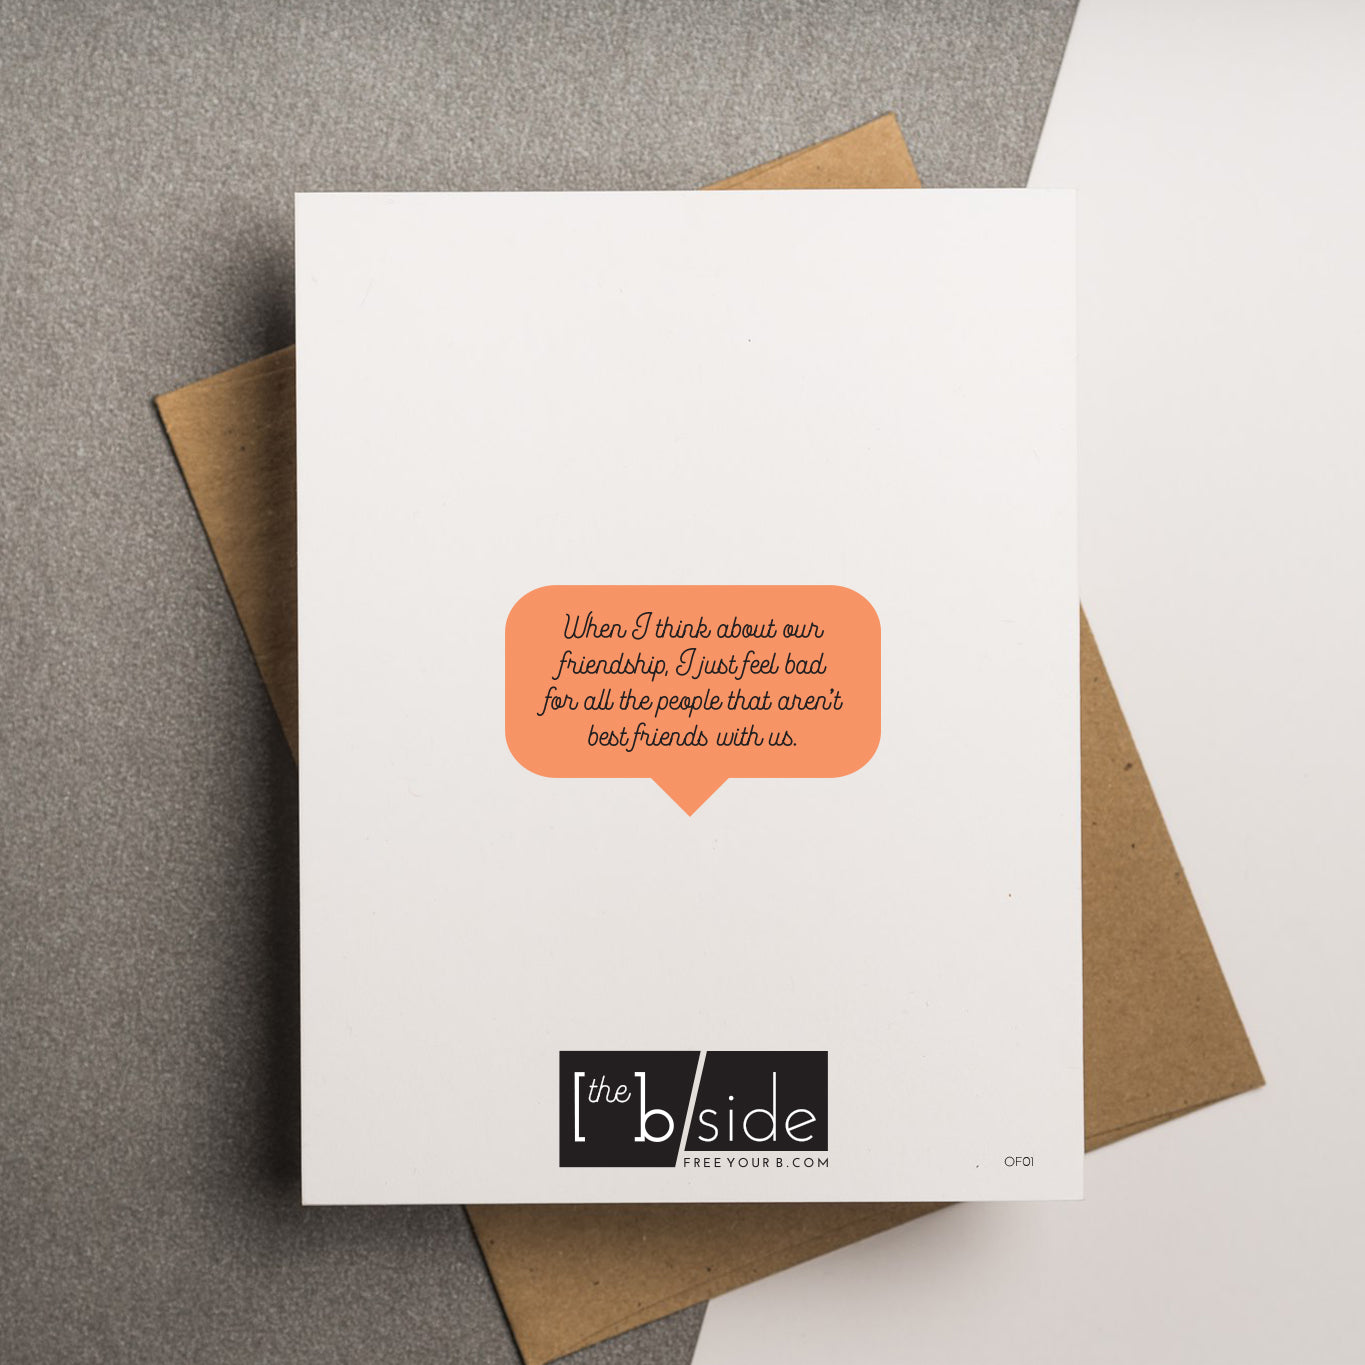 A funny and honest friendship greeting card that reads "When I think about our friendship, I just feel bad for all the people that aren't best friends with us." on the back side